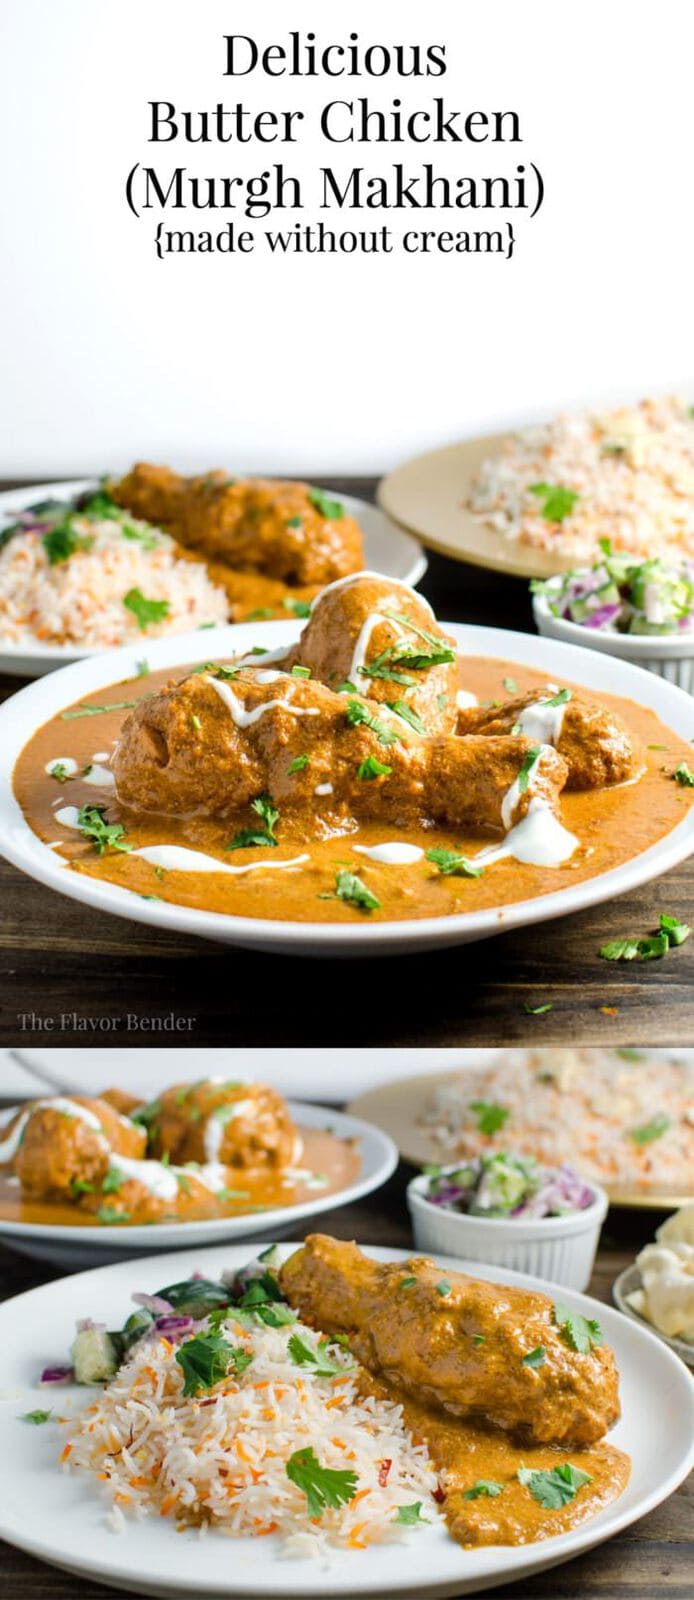 Amazing Butter Chicken Without Cream Murgh Makhani The Flavor Bender,Top Furniture Stores